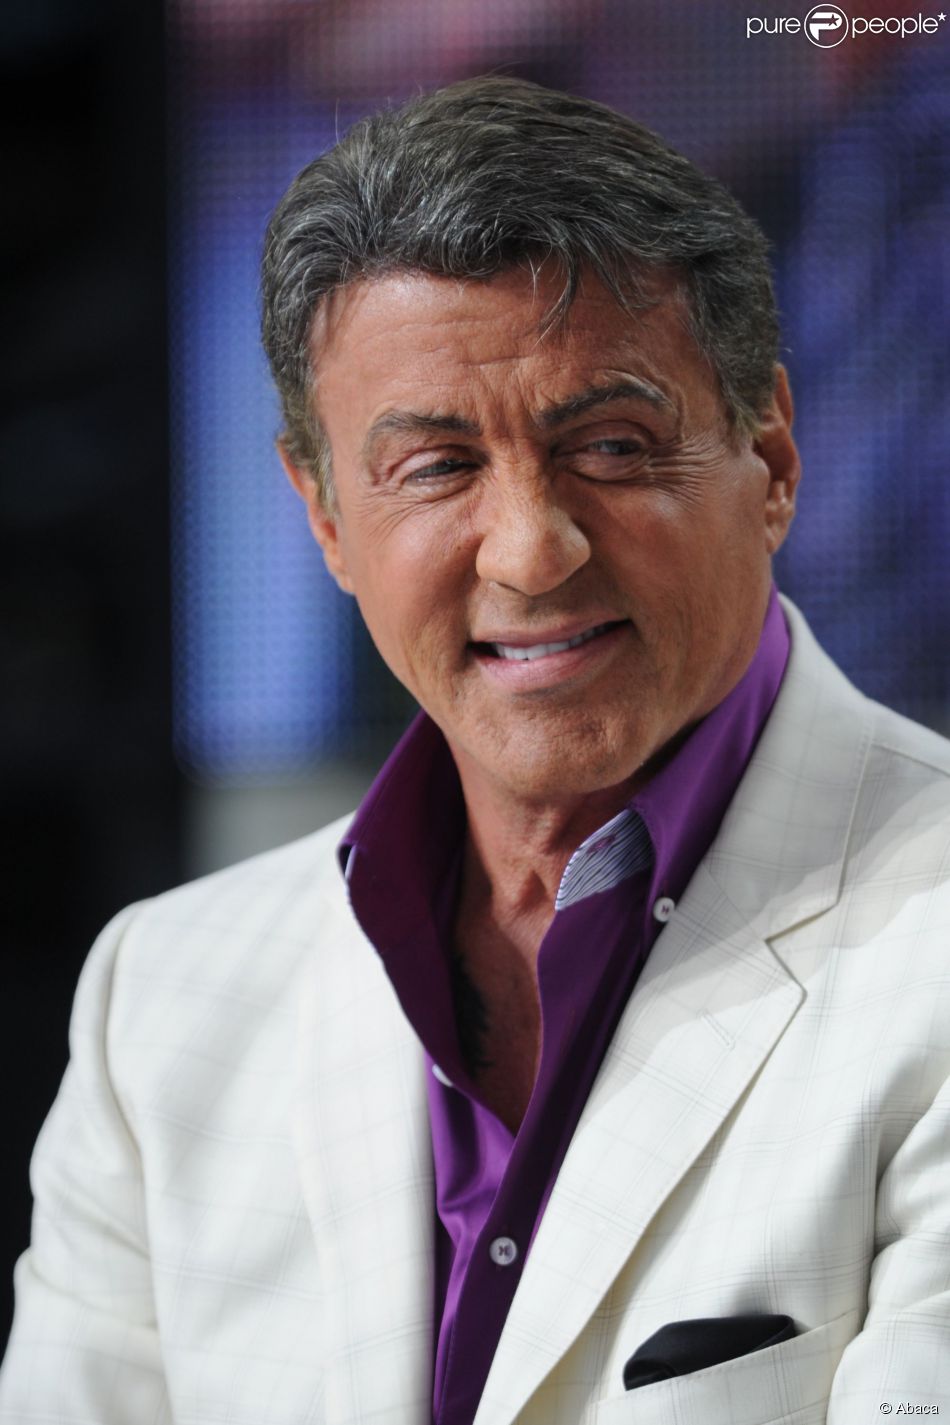 Photos de 2000 à nos jours - Page 12 1474728-sylvester-stallone-appears-on-canal-950x0-1